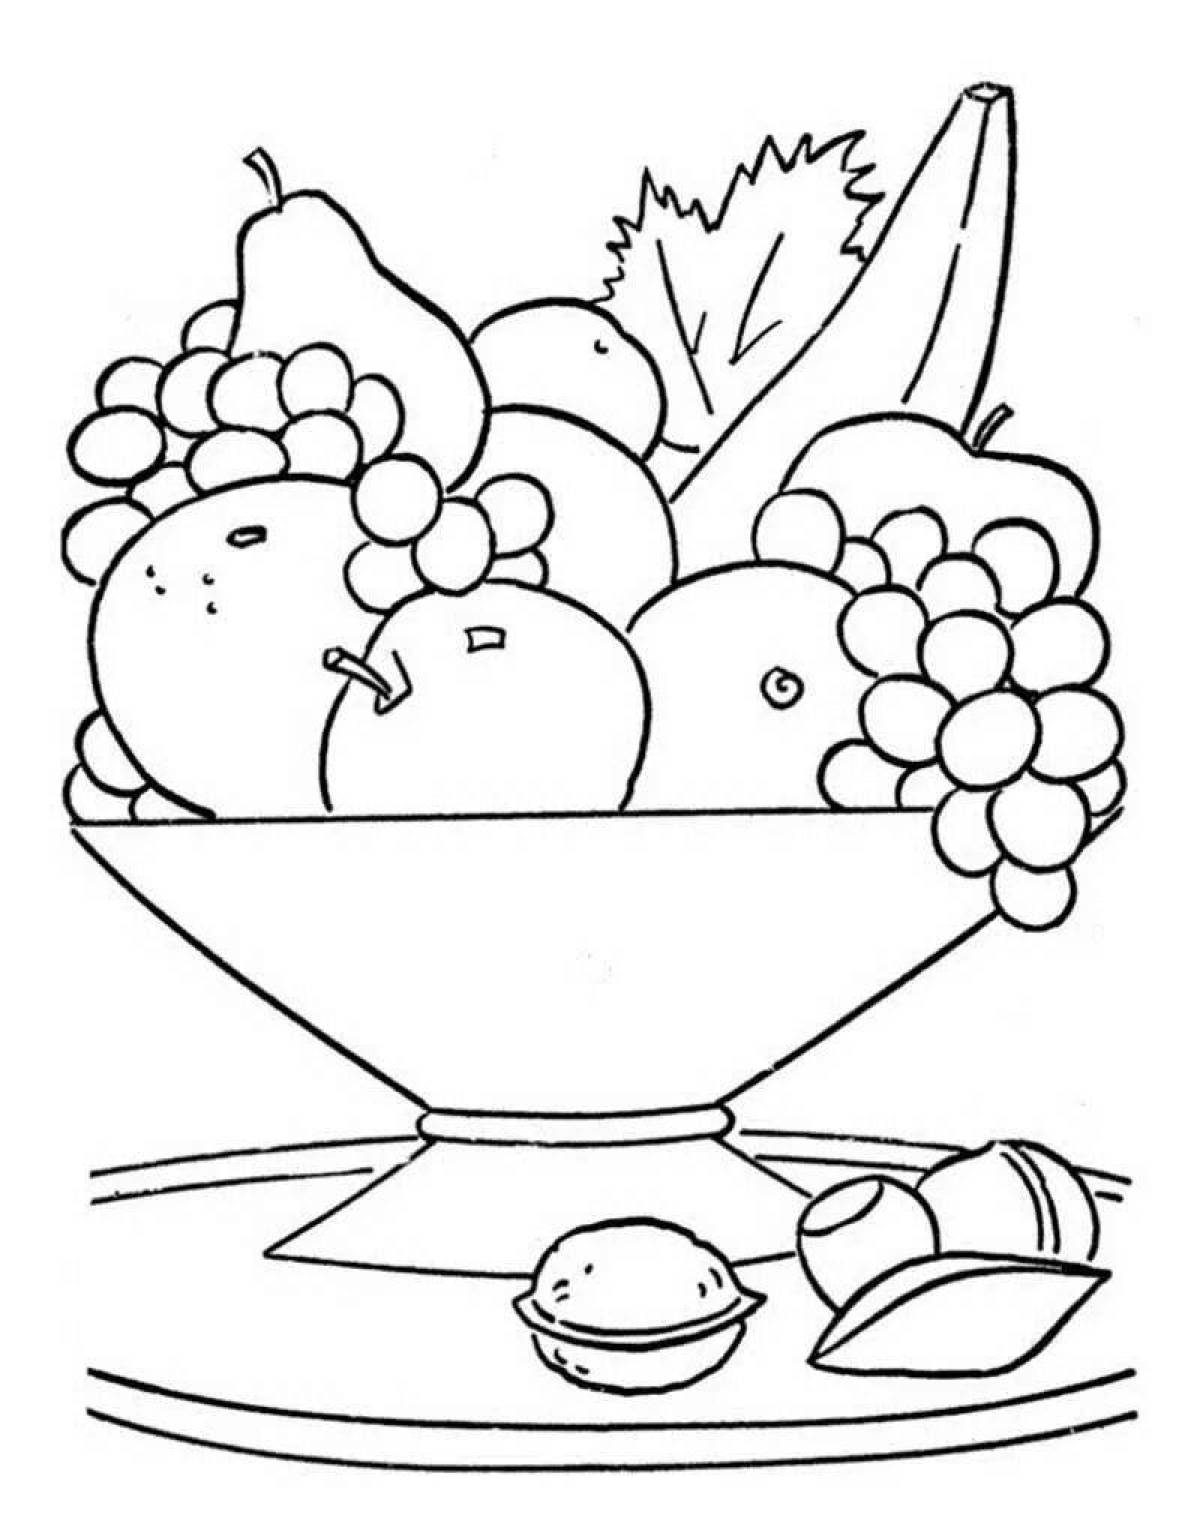 Intriguing fruit plate coloring book for kids